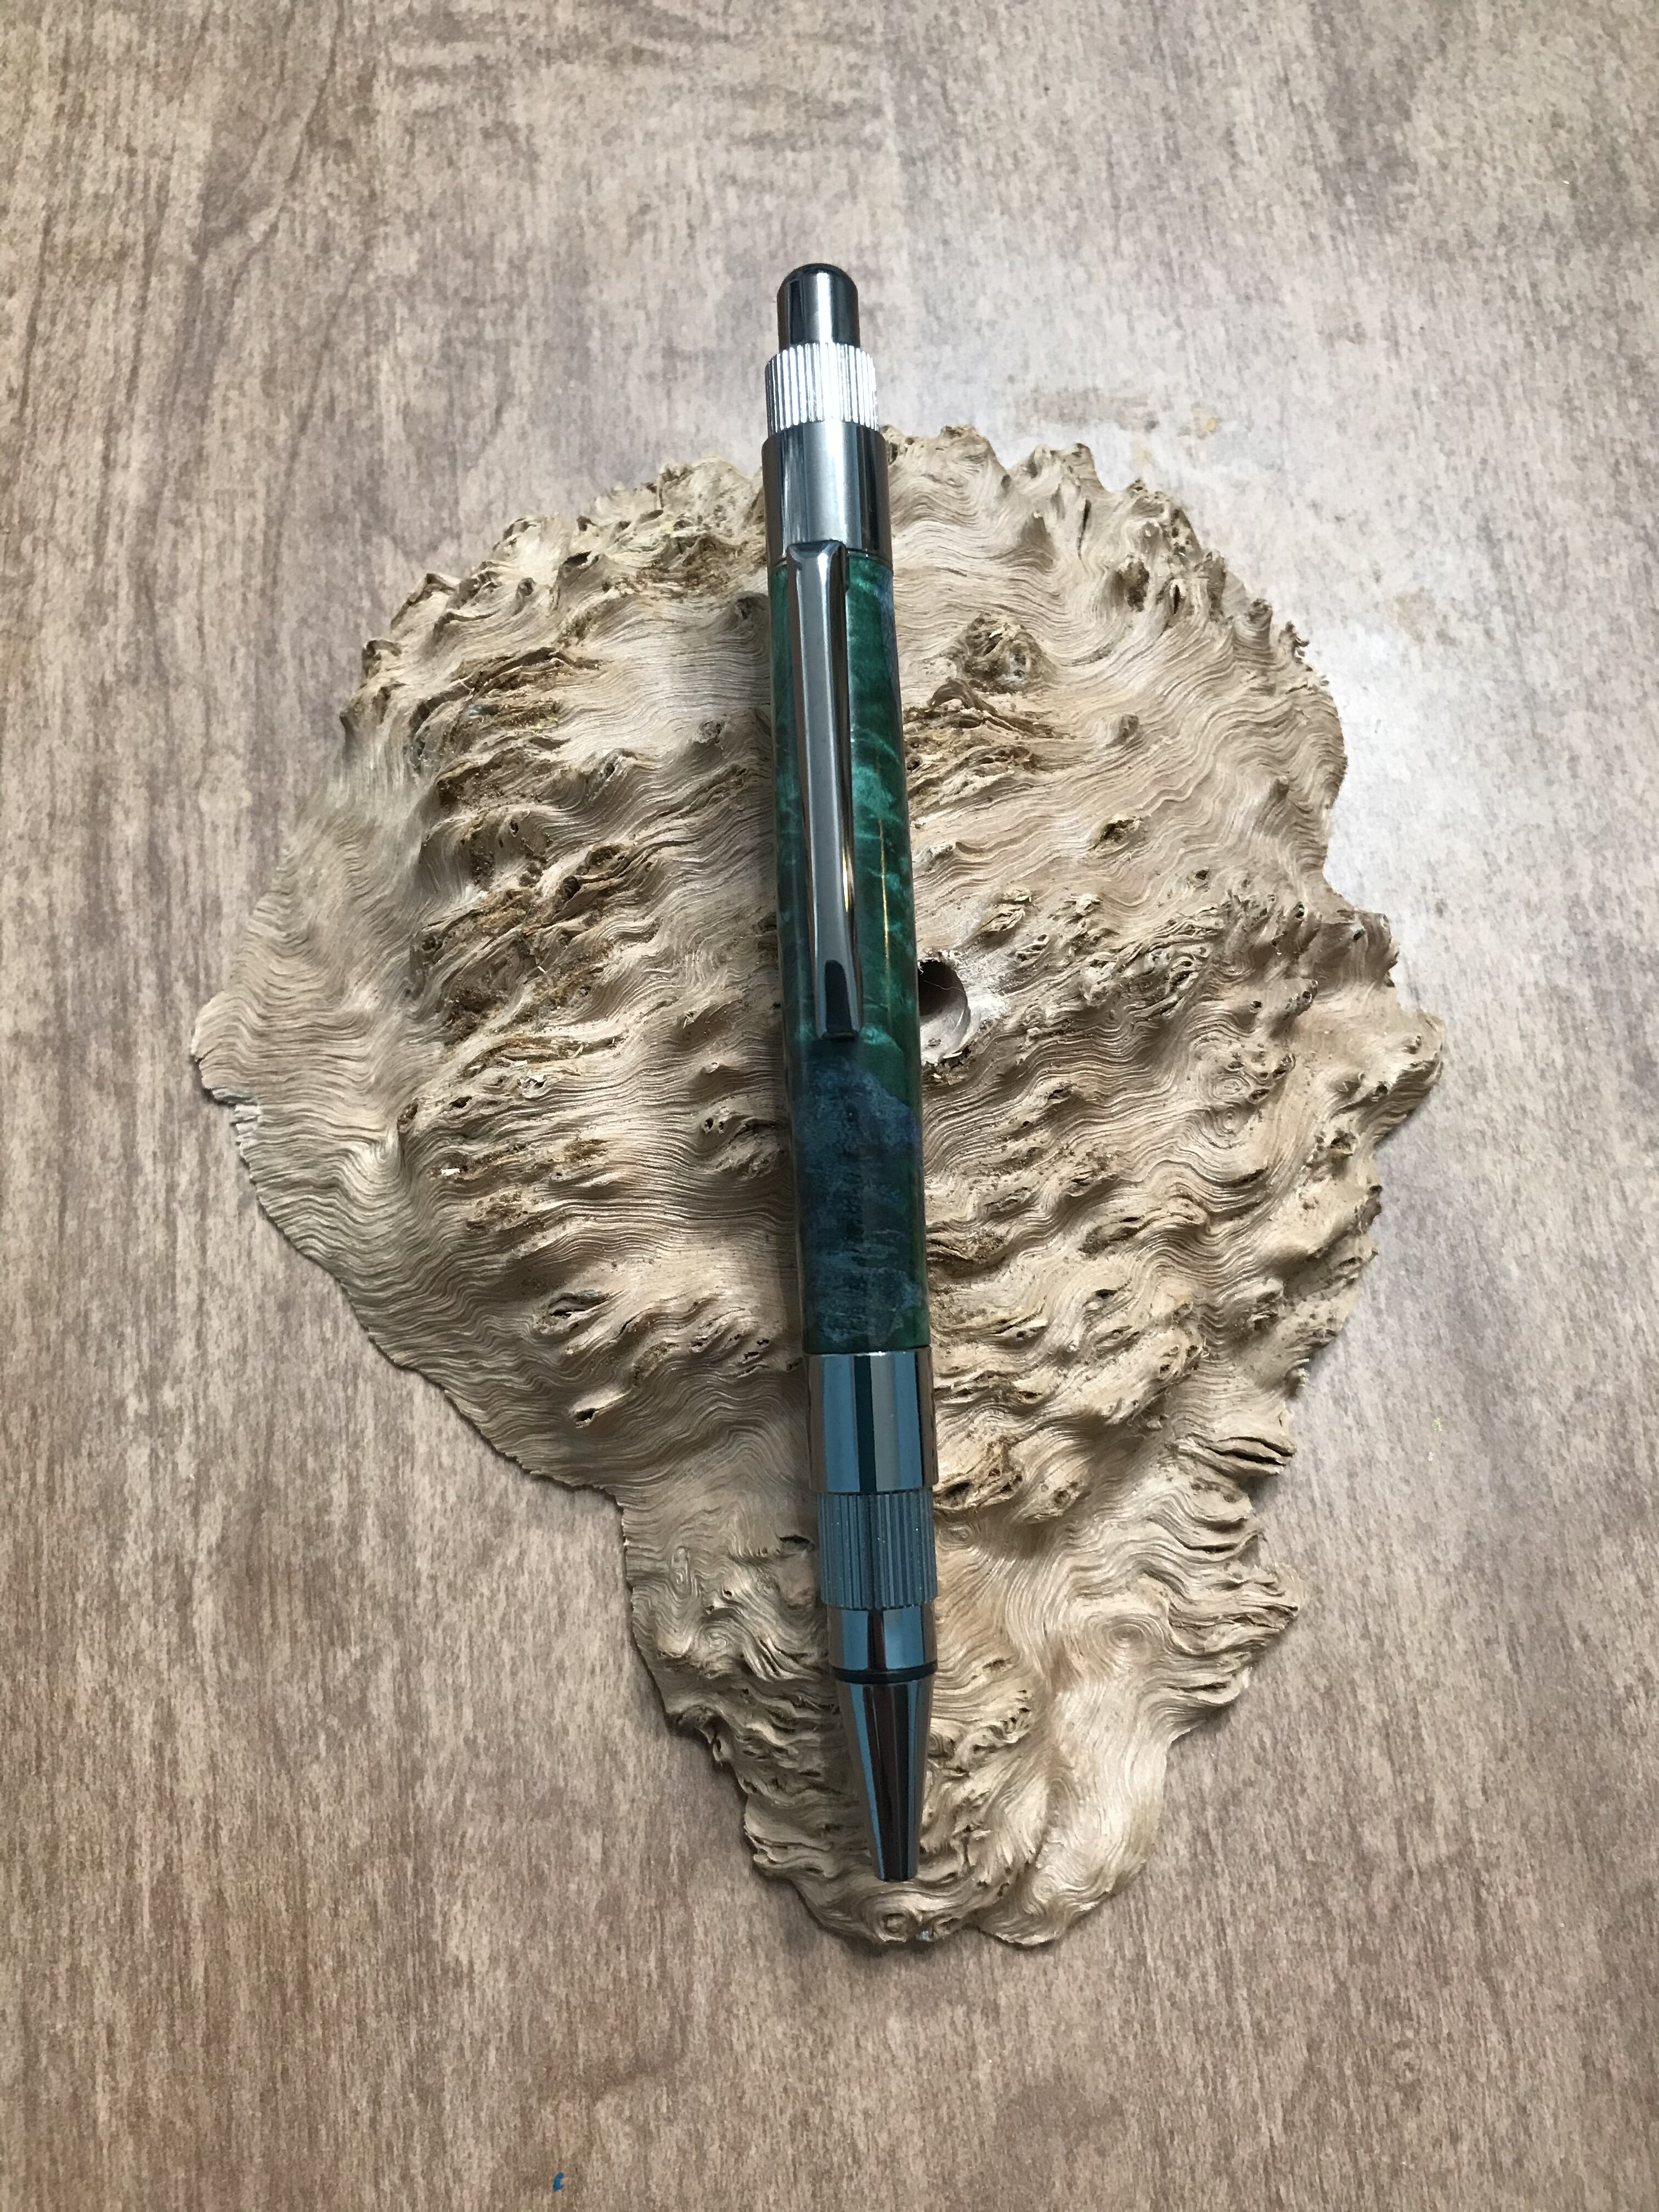 Double Dyed Spalted Curly Maple on a Stratus Gun Metal Click Pen